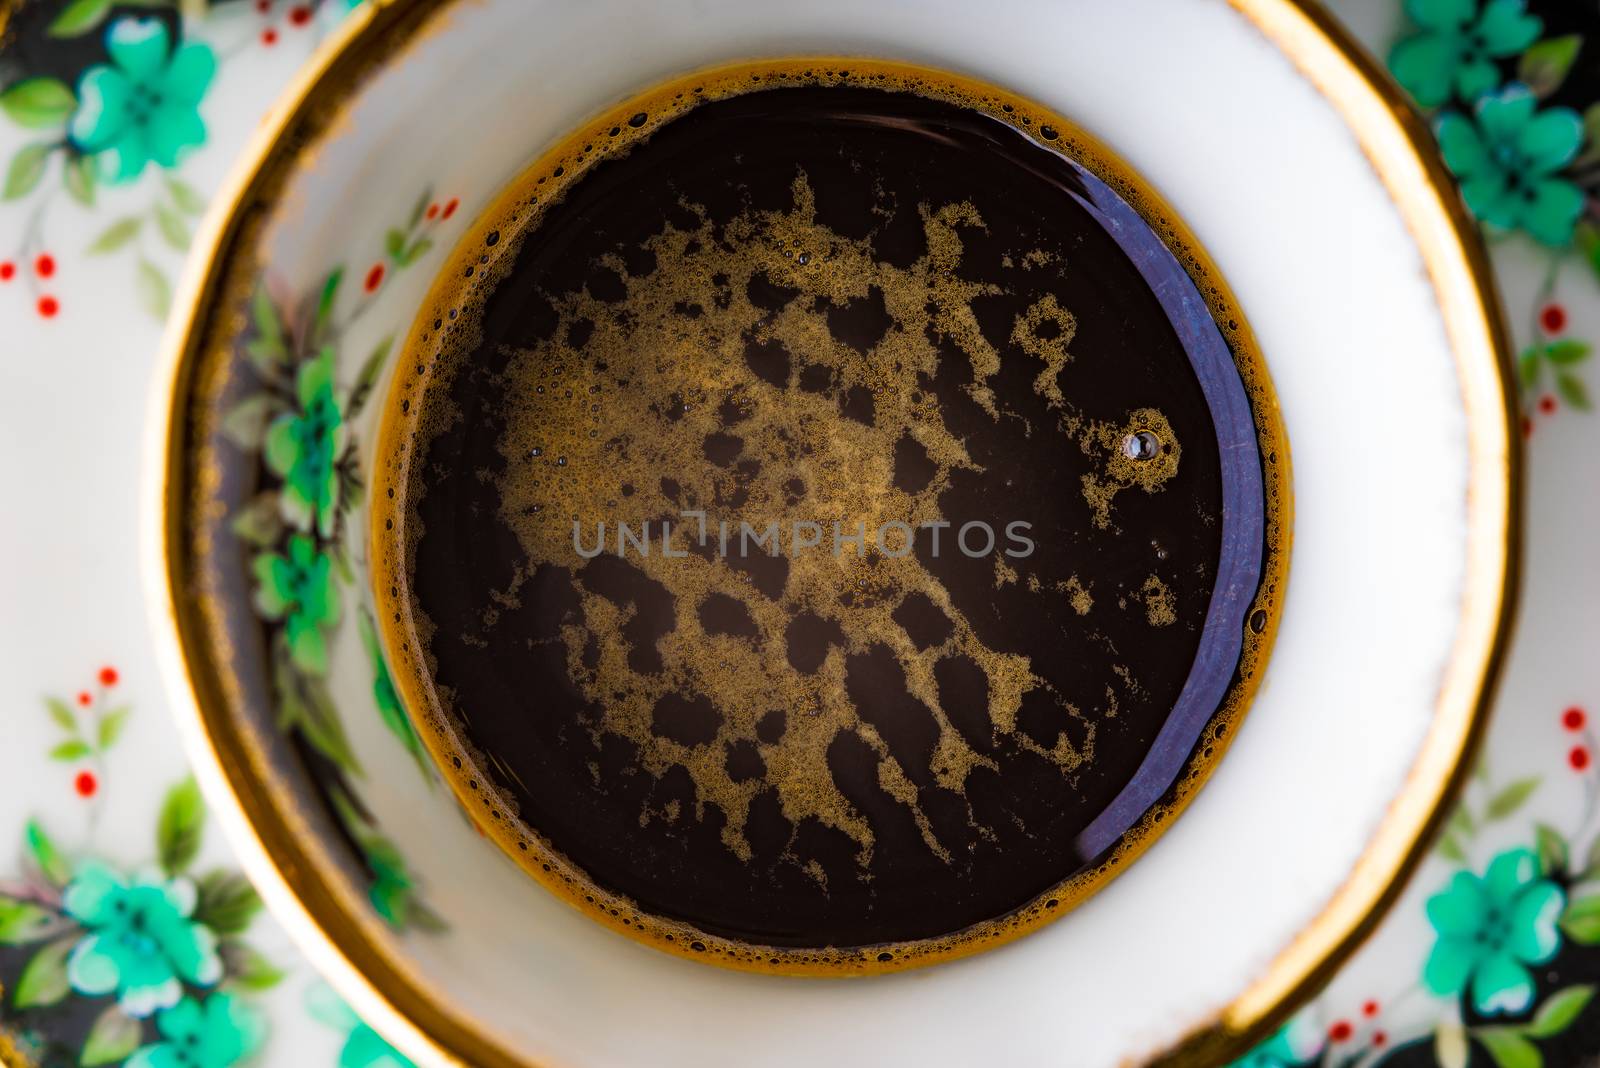 Vintage cup of coffee close-up horizontal